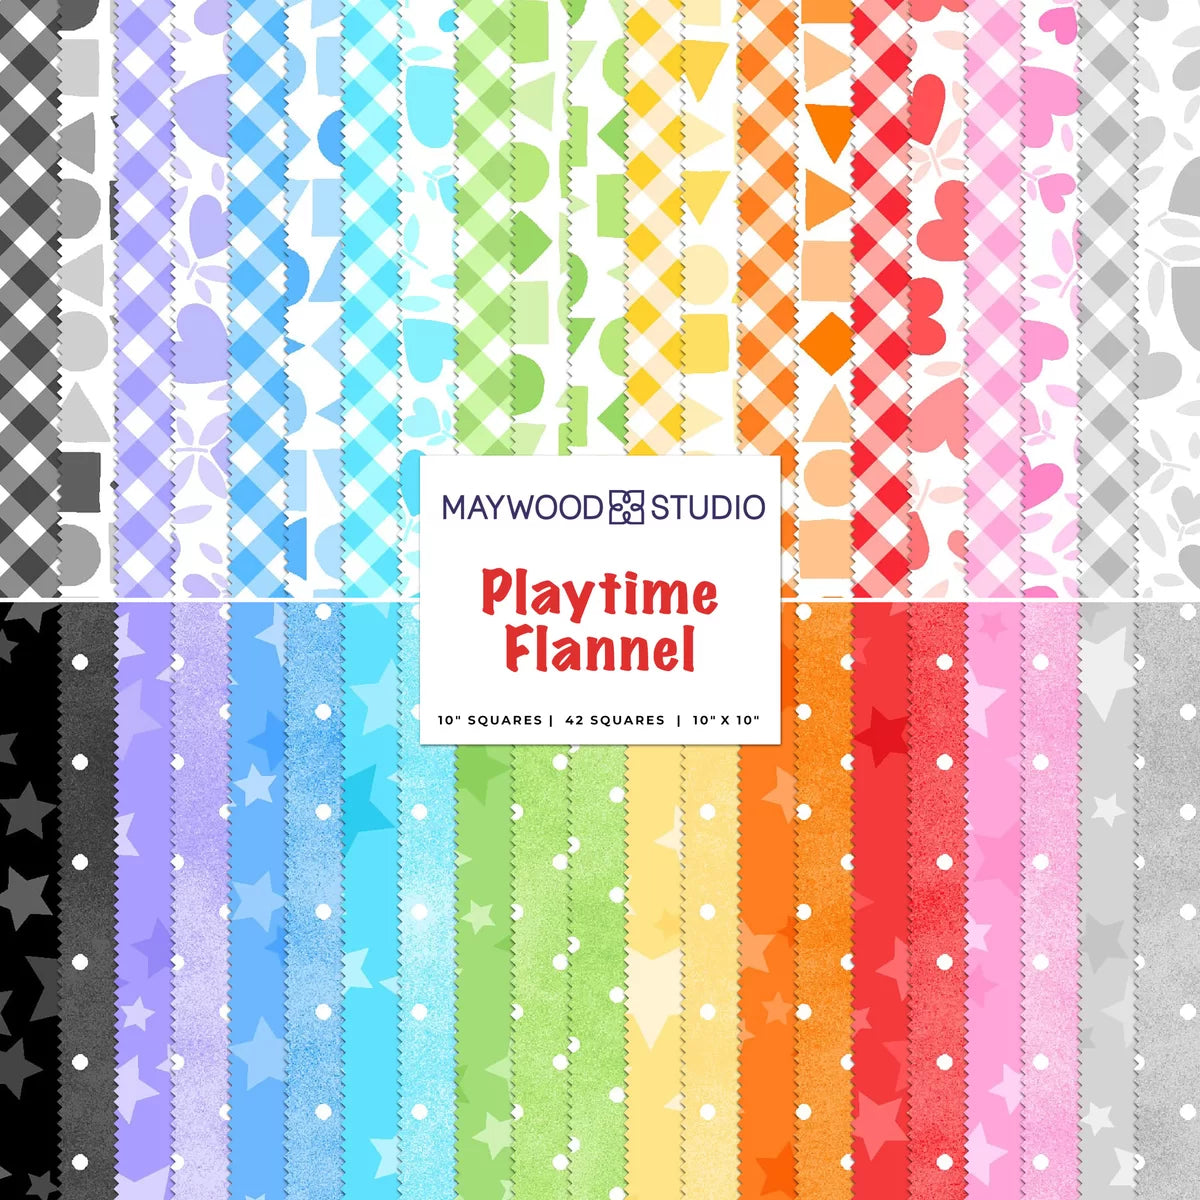 Playtime Flannel Basics 10-inch Squares (42pcs) from Maywood Studio